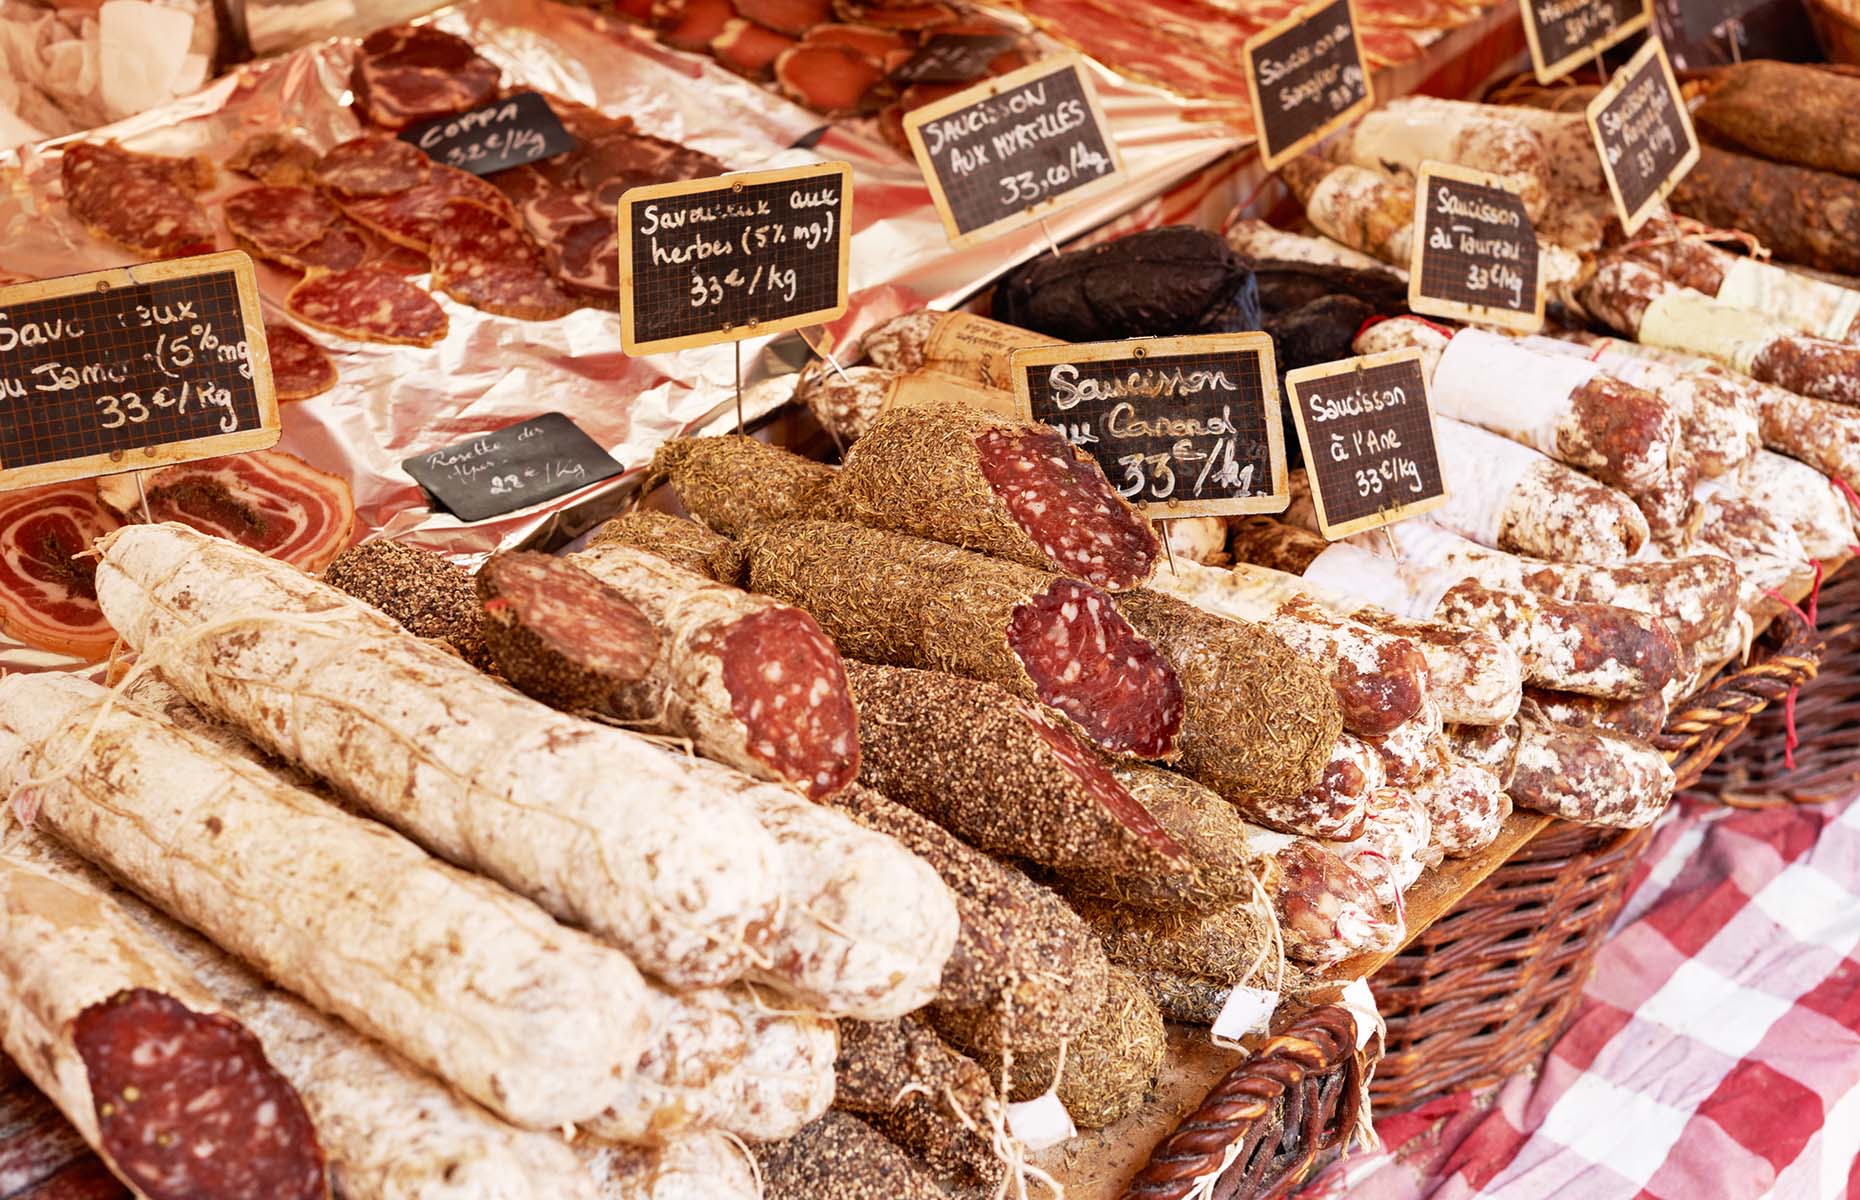 Charcuterie from France